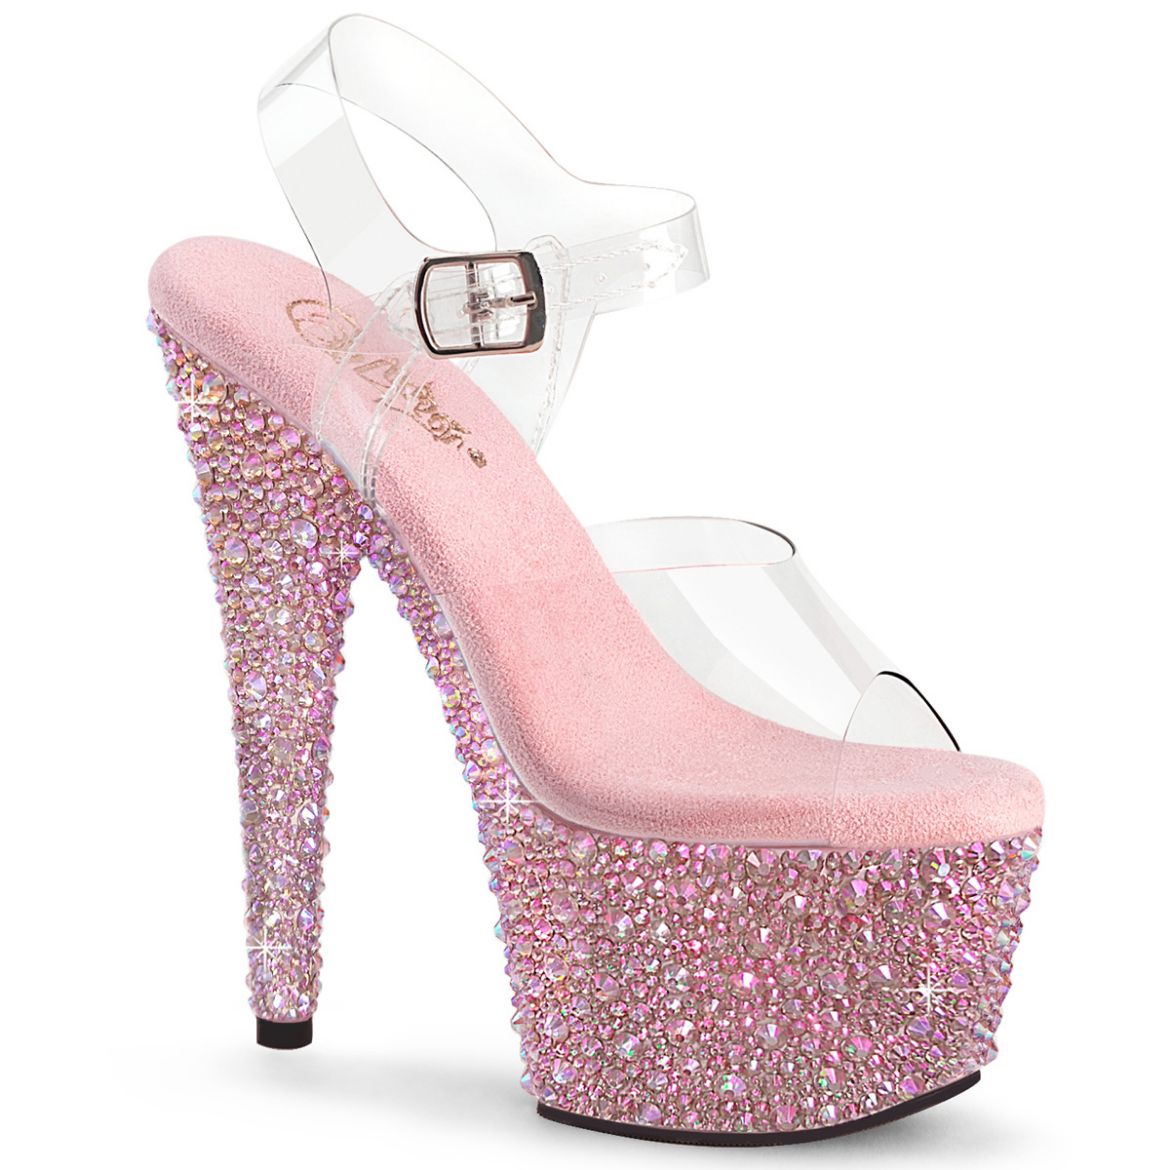 Product image of Pleaser BEJEWELED-708MS Clr/B. Pink Multi RS 7 Inch Heel 2 3/4 Inch PF Ankle Strap Sandal w/Multi Sized RS